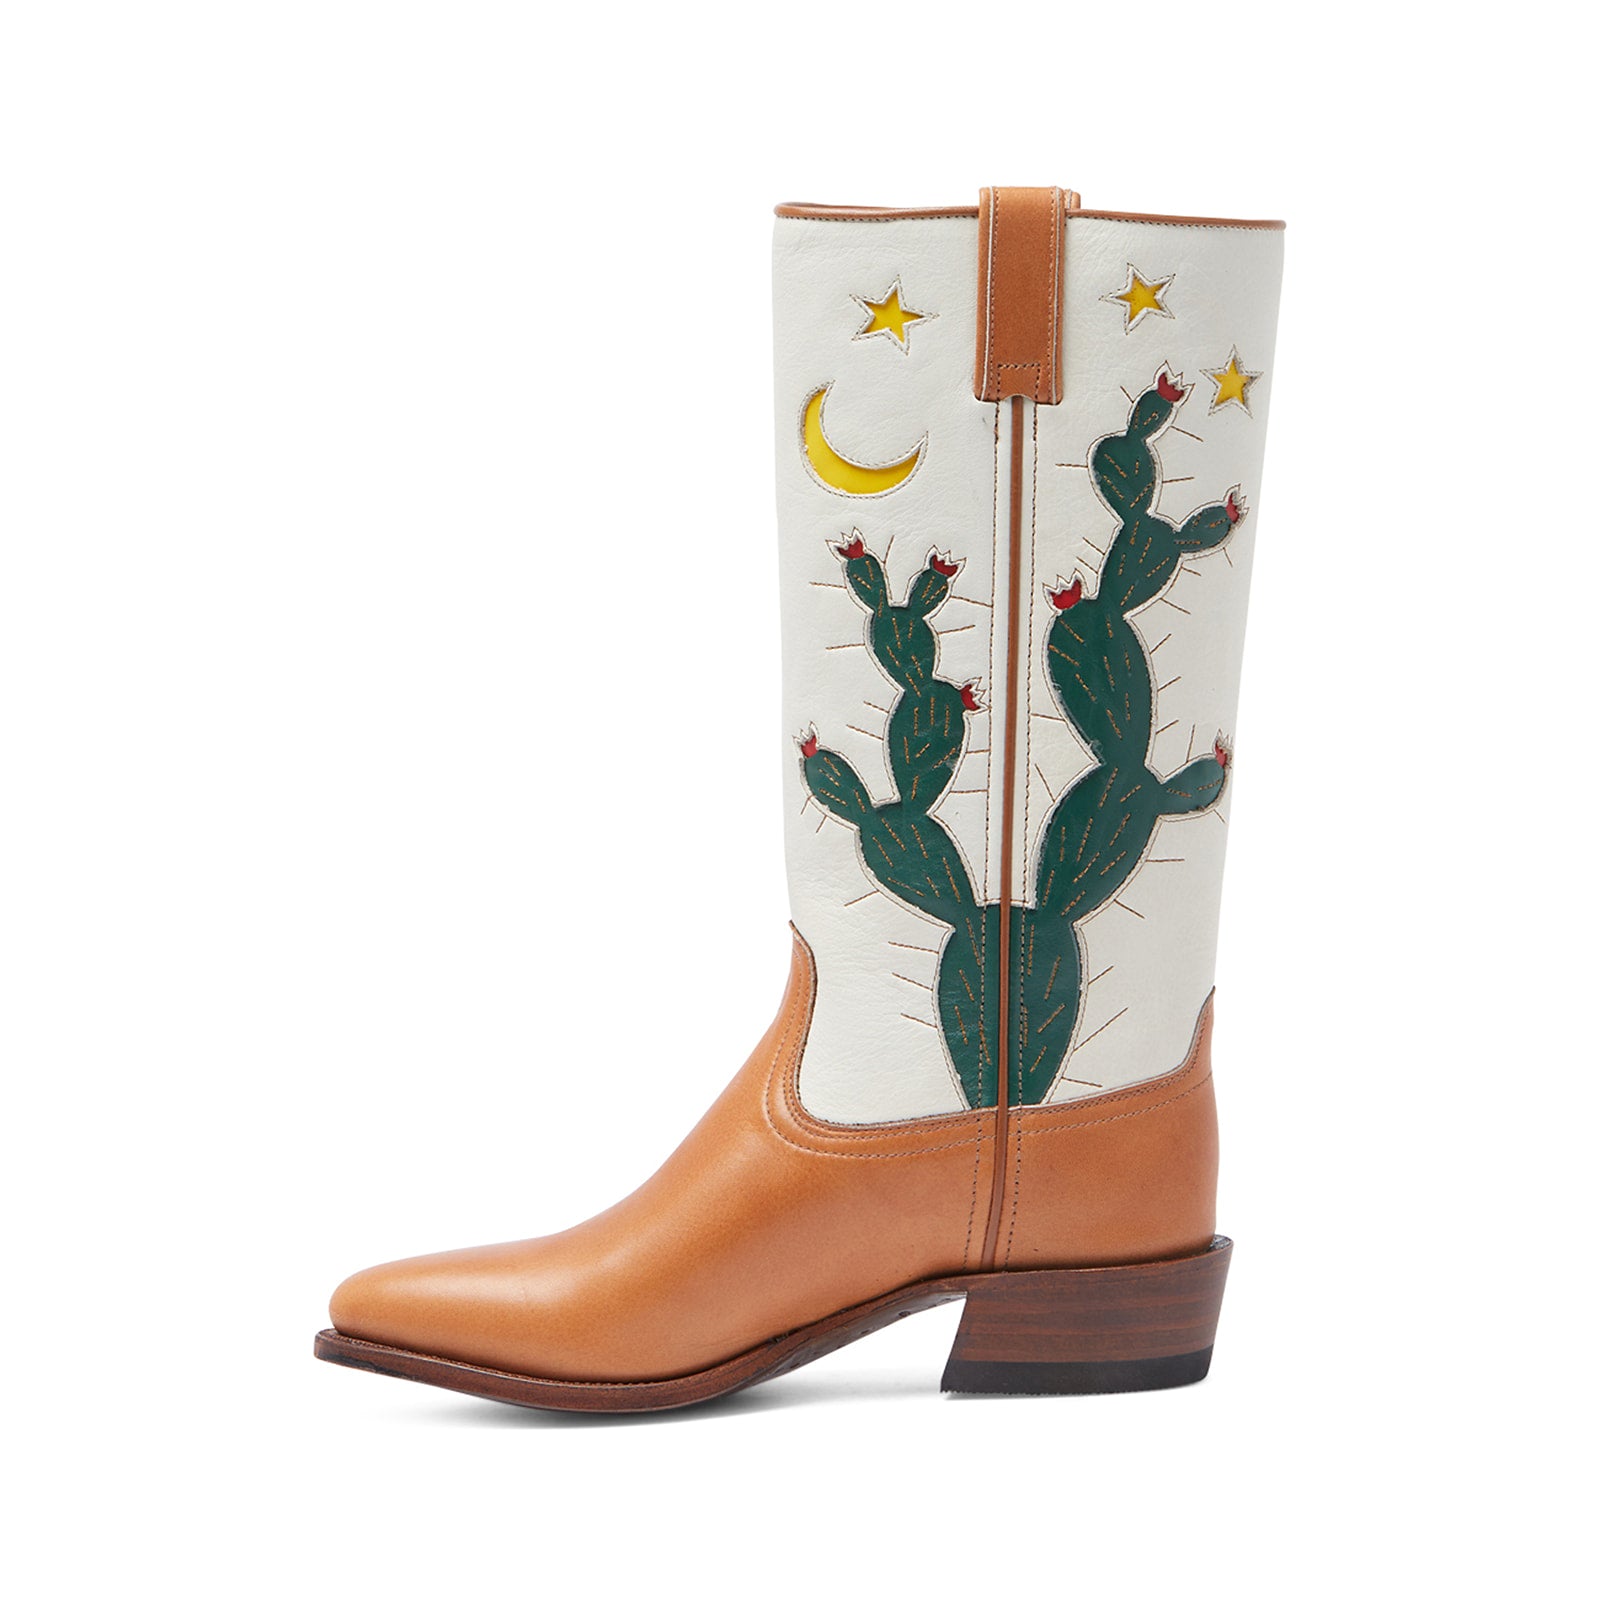 ARCHER PRICKLY TALL_WOMEN'S WESTERN_LEFT BOOT